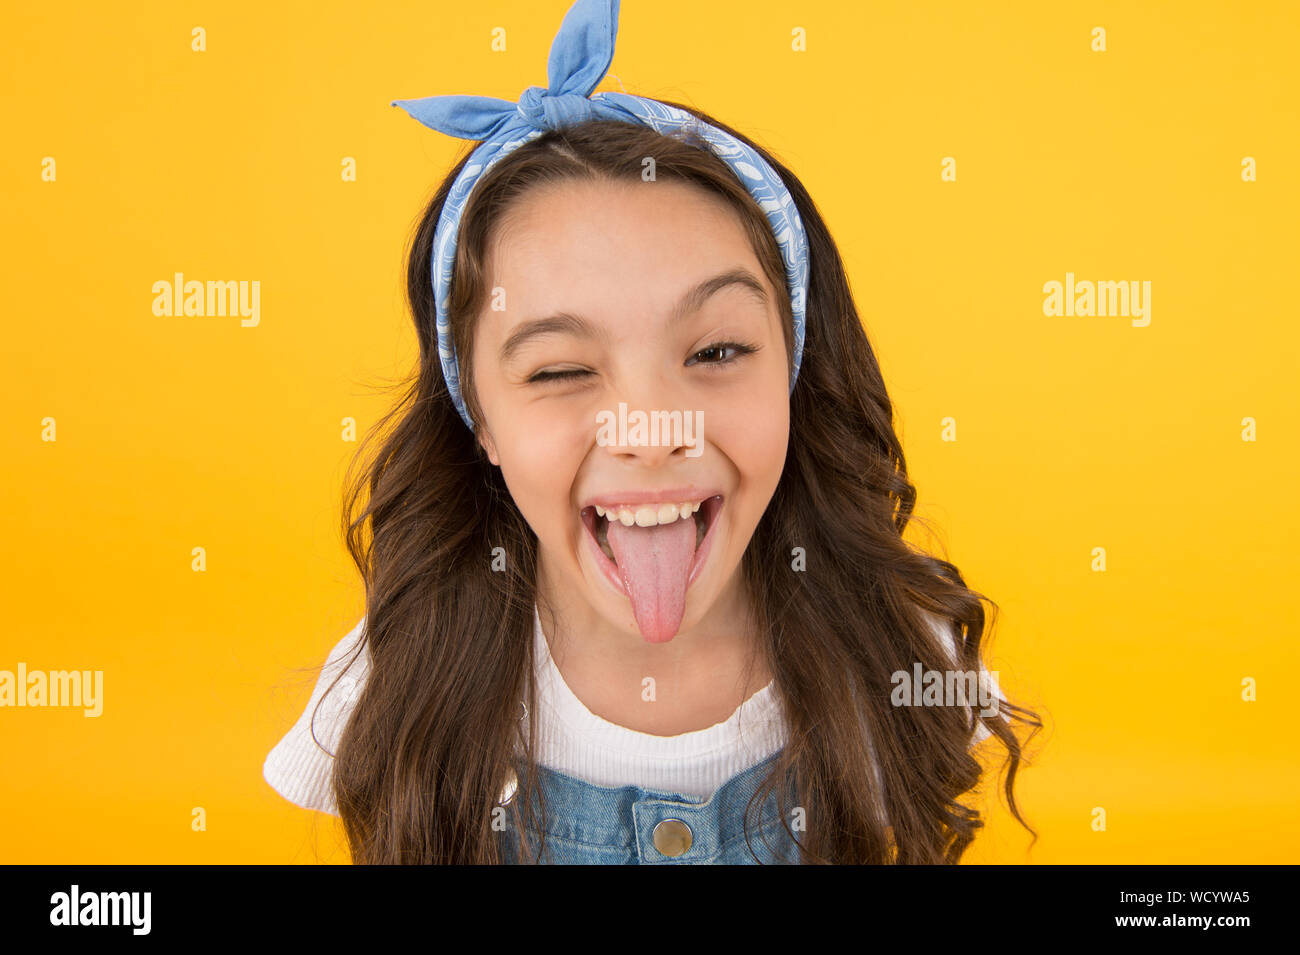 This how happiness looks like. Happy smiling kid girl close up face. Emotional expression. Express happiness. Emotional child concept. Mental health. Positive emotions. Cheerful teen. Feel happiness. Stock Photo